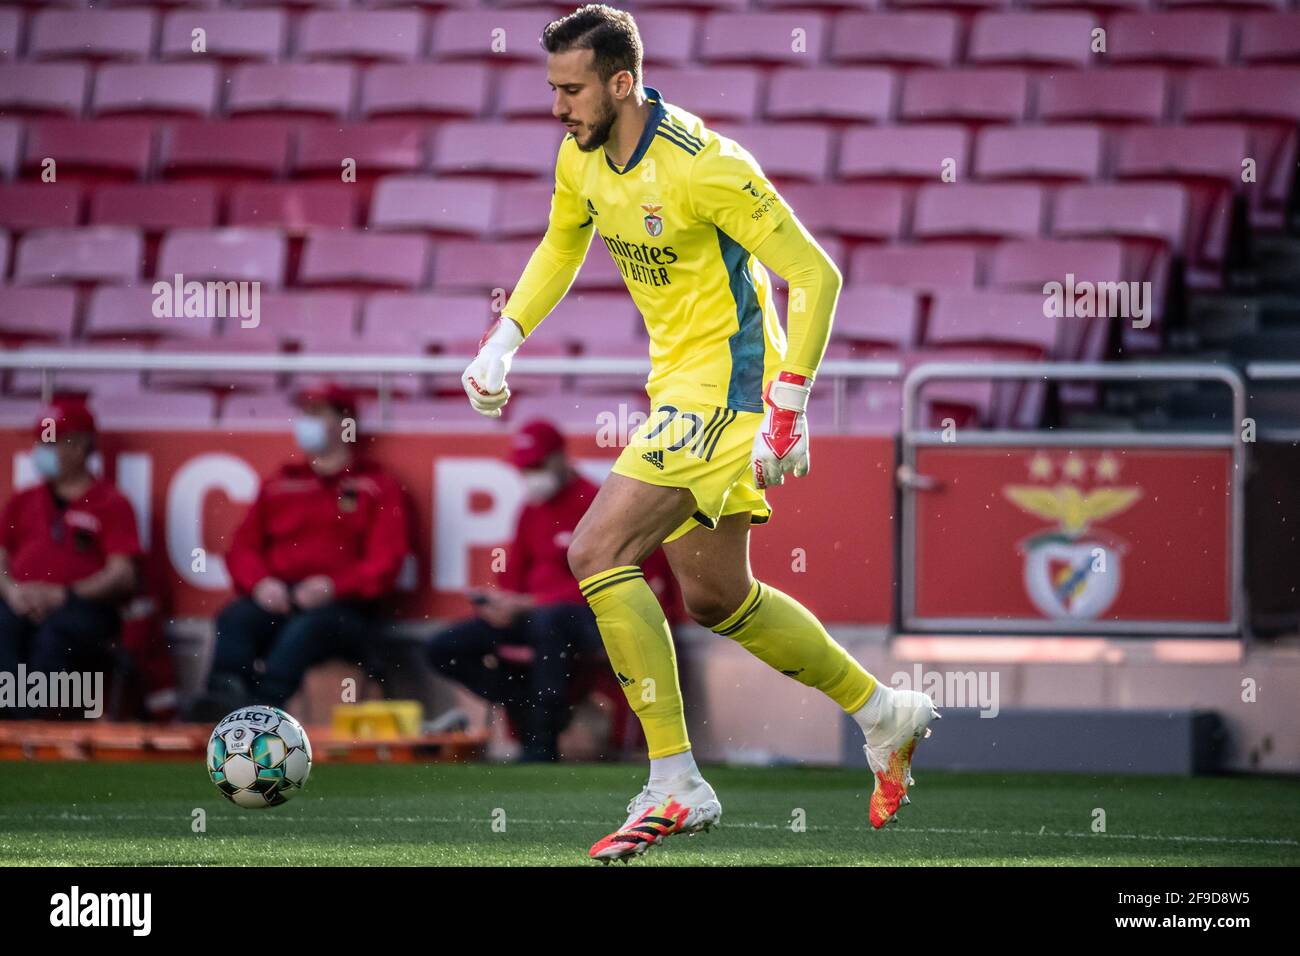 Lisbon, Portugal. 17th Apr, 2021. Helton Leite GK of Benfica during the  mens Liga NOS game between SL Benfica and Gil Vicente at Luz Stadium in  Lisbon, Portugal on April 17, 2021